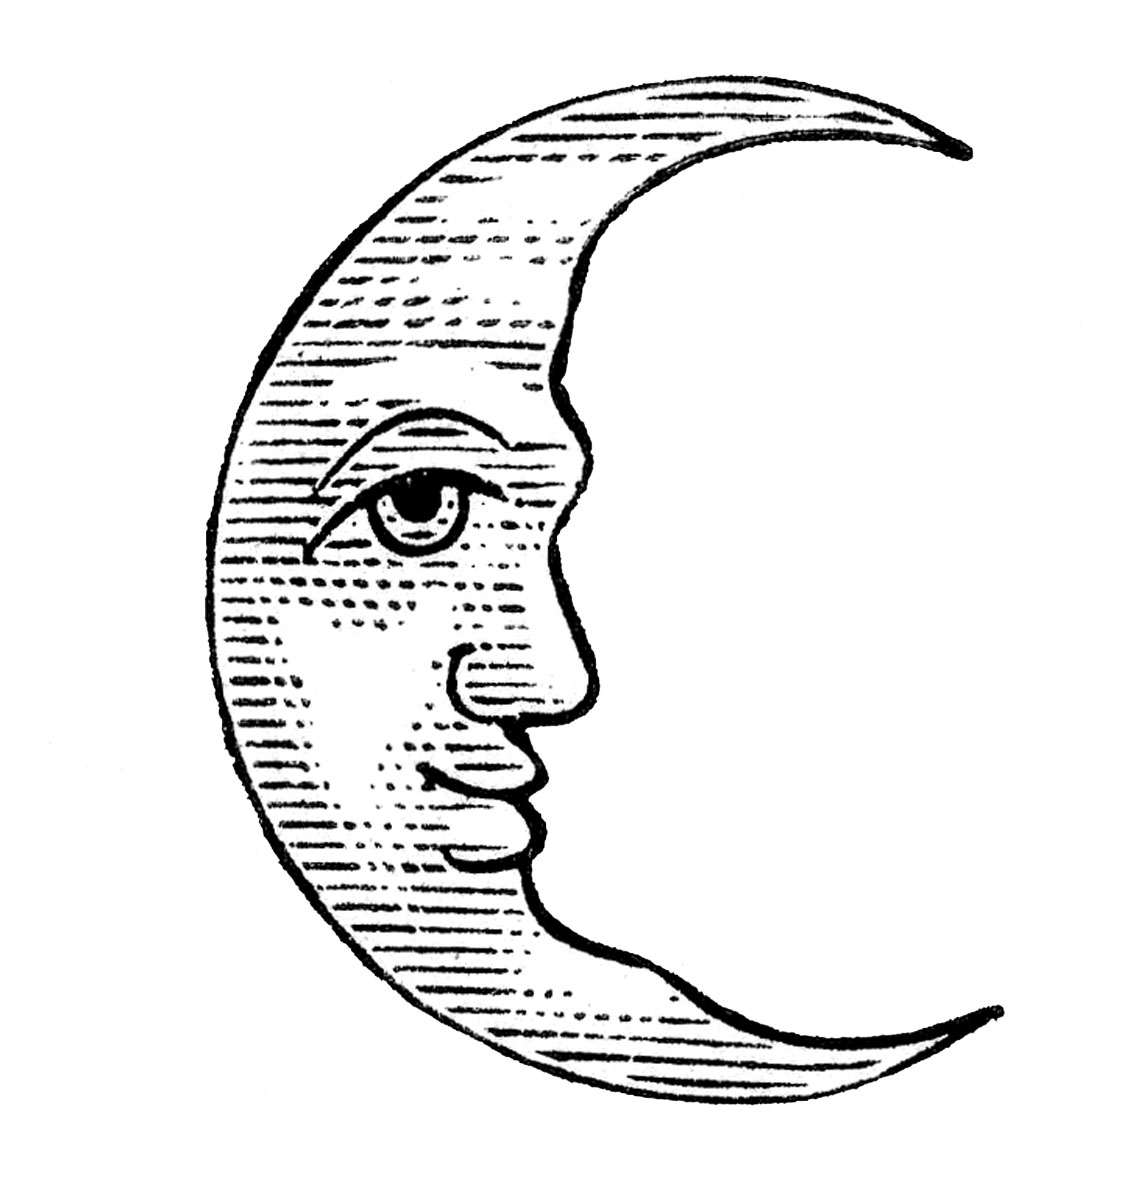 Antique Clip Art - Man in the Moon - Crescent and Full - The 